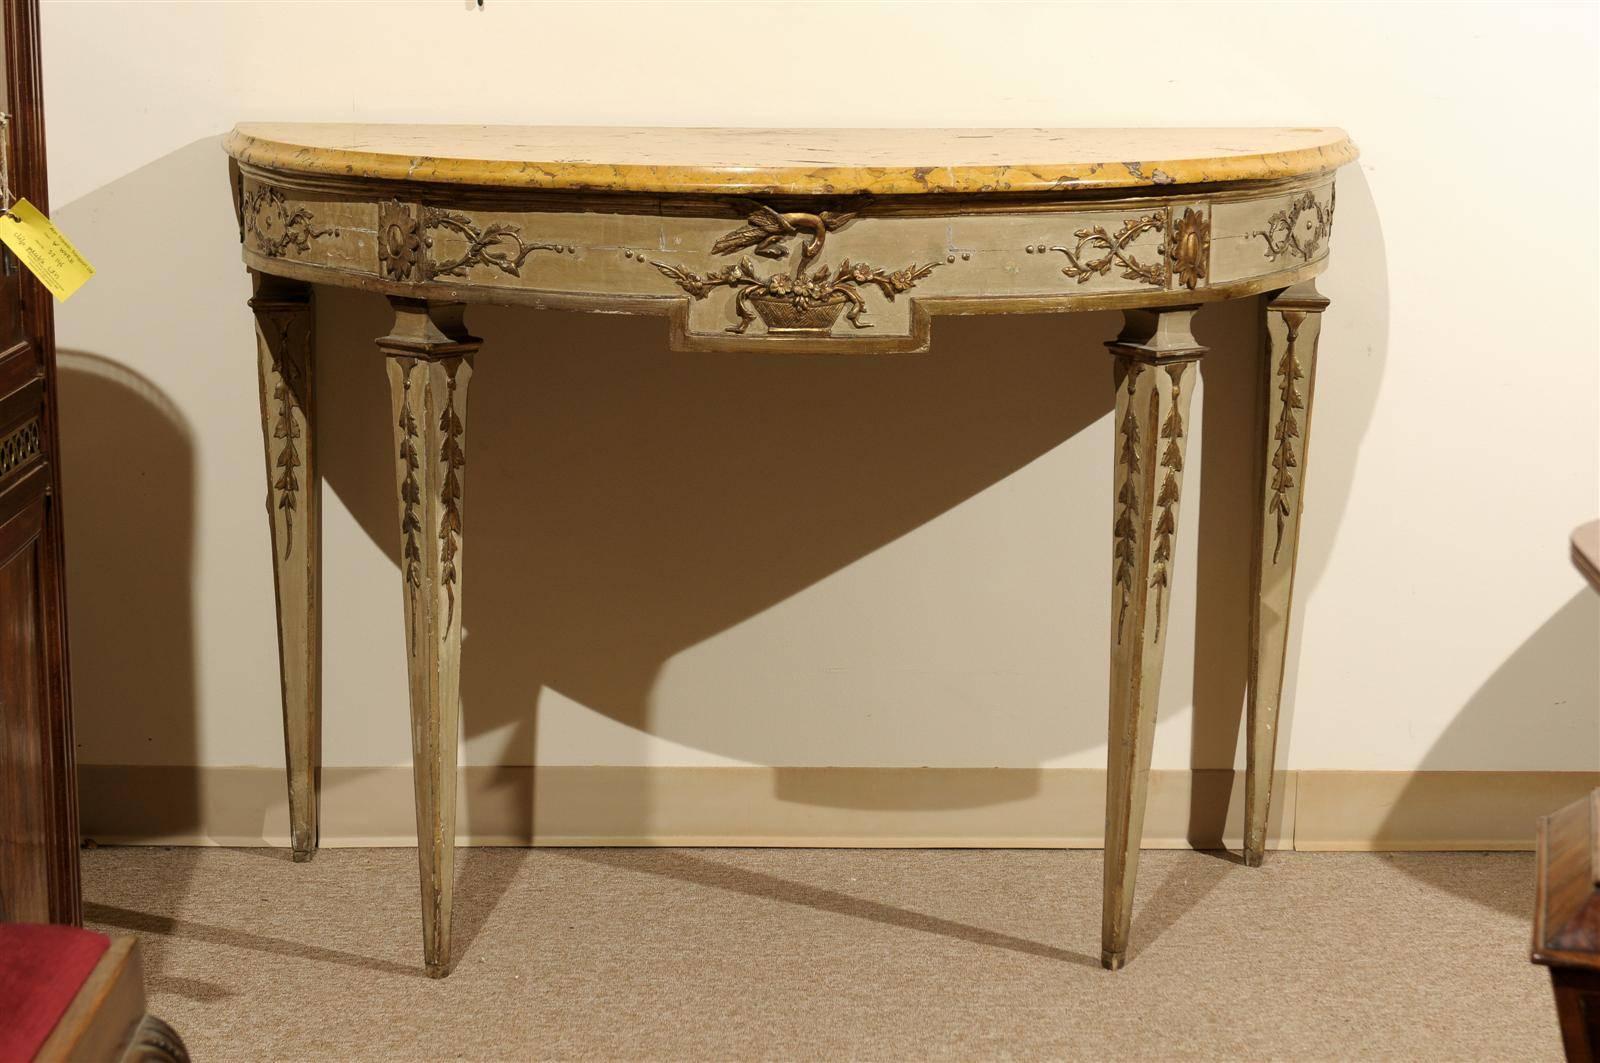 A large 18th century Italian neoclassical painted and parcel gilt console with sienna marble top.